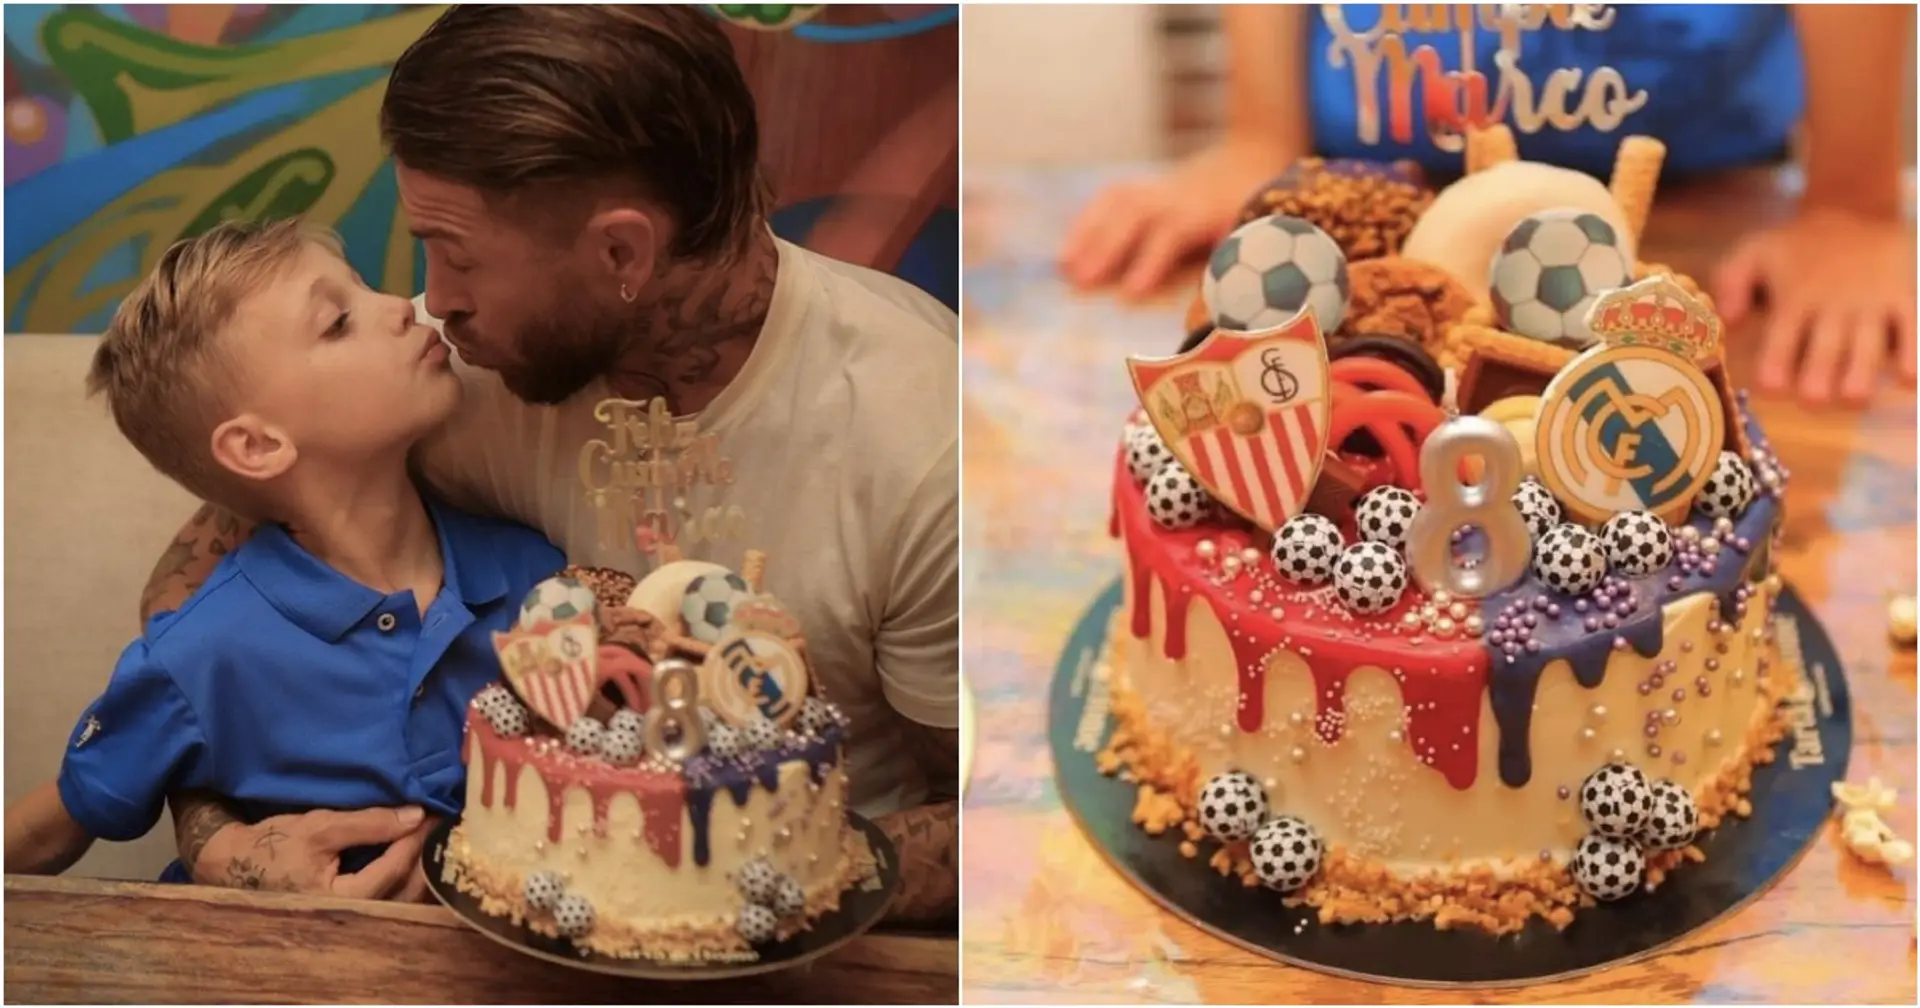 Sergio Ramos orders cake with Madrid, Sevilla and Barcelona references for son's B'day - Barca fans would hate it